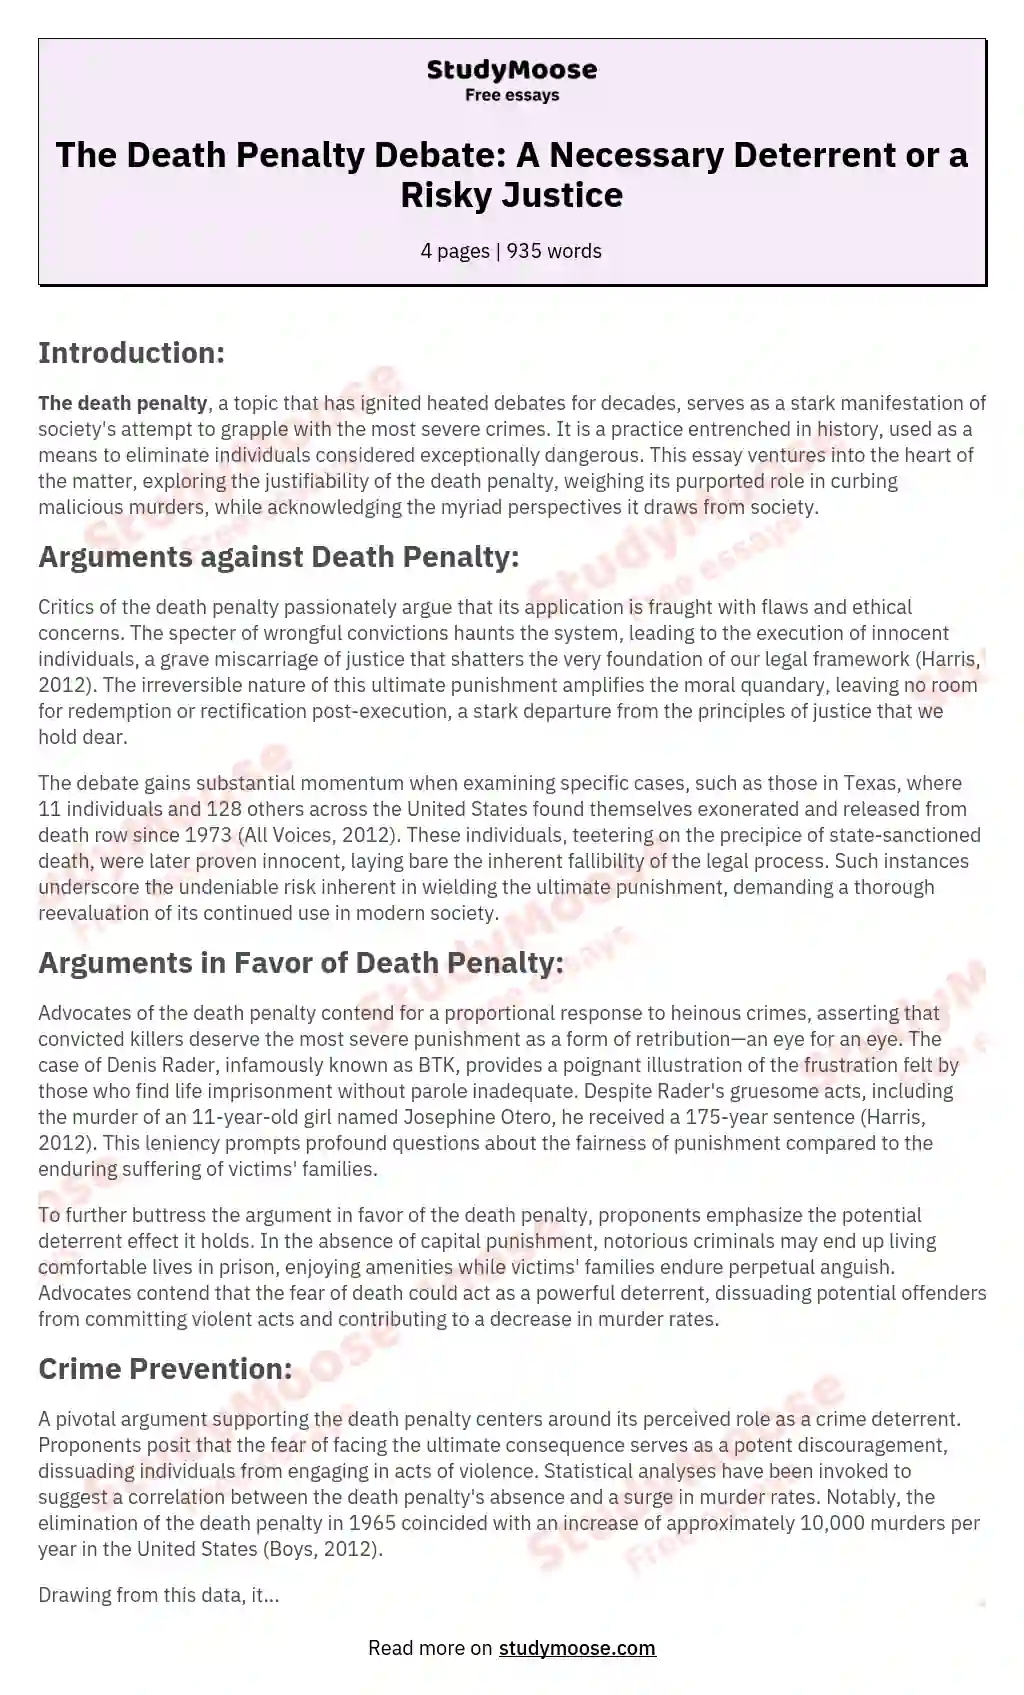 The Death Penalty Debate: A Necessary Deterrent or a Risky Justice essay